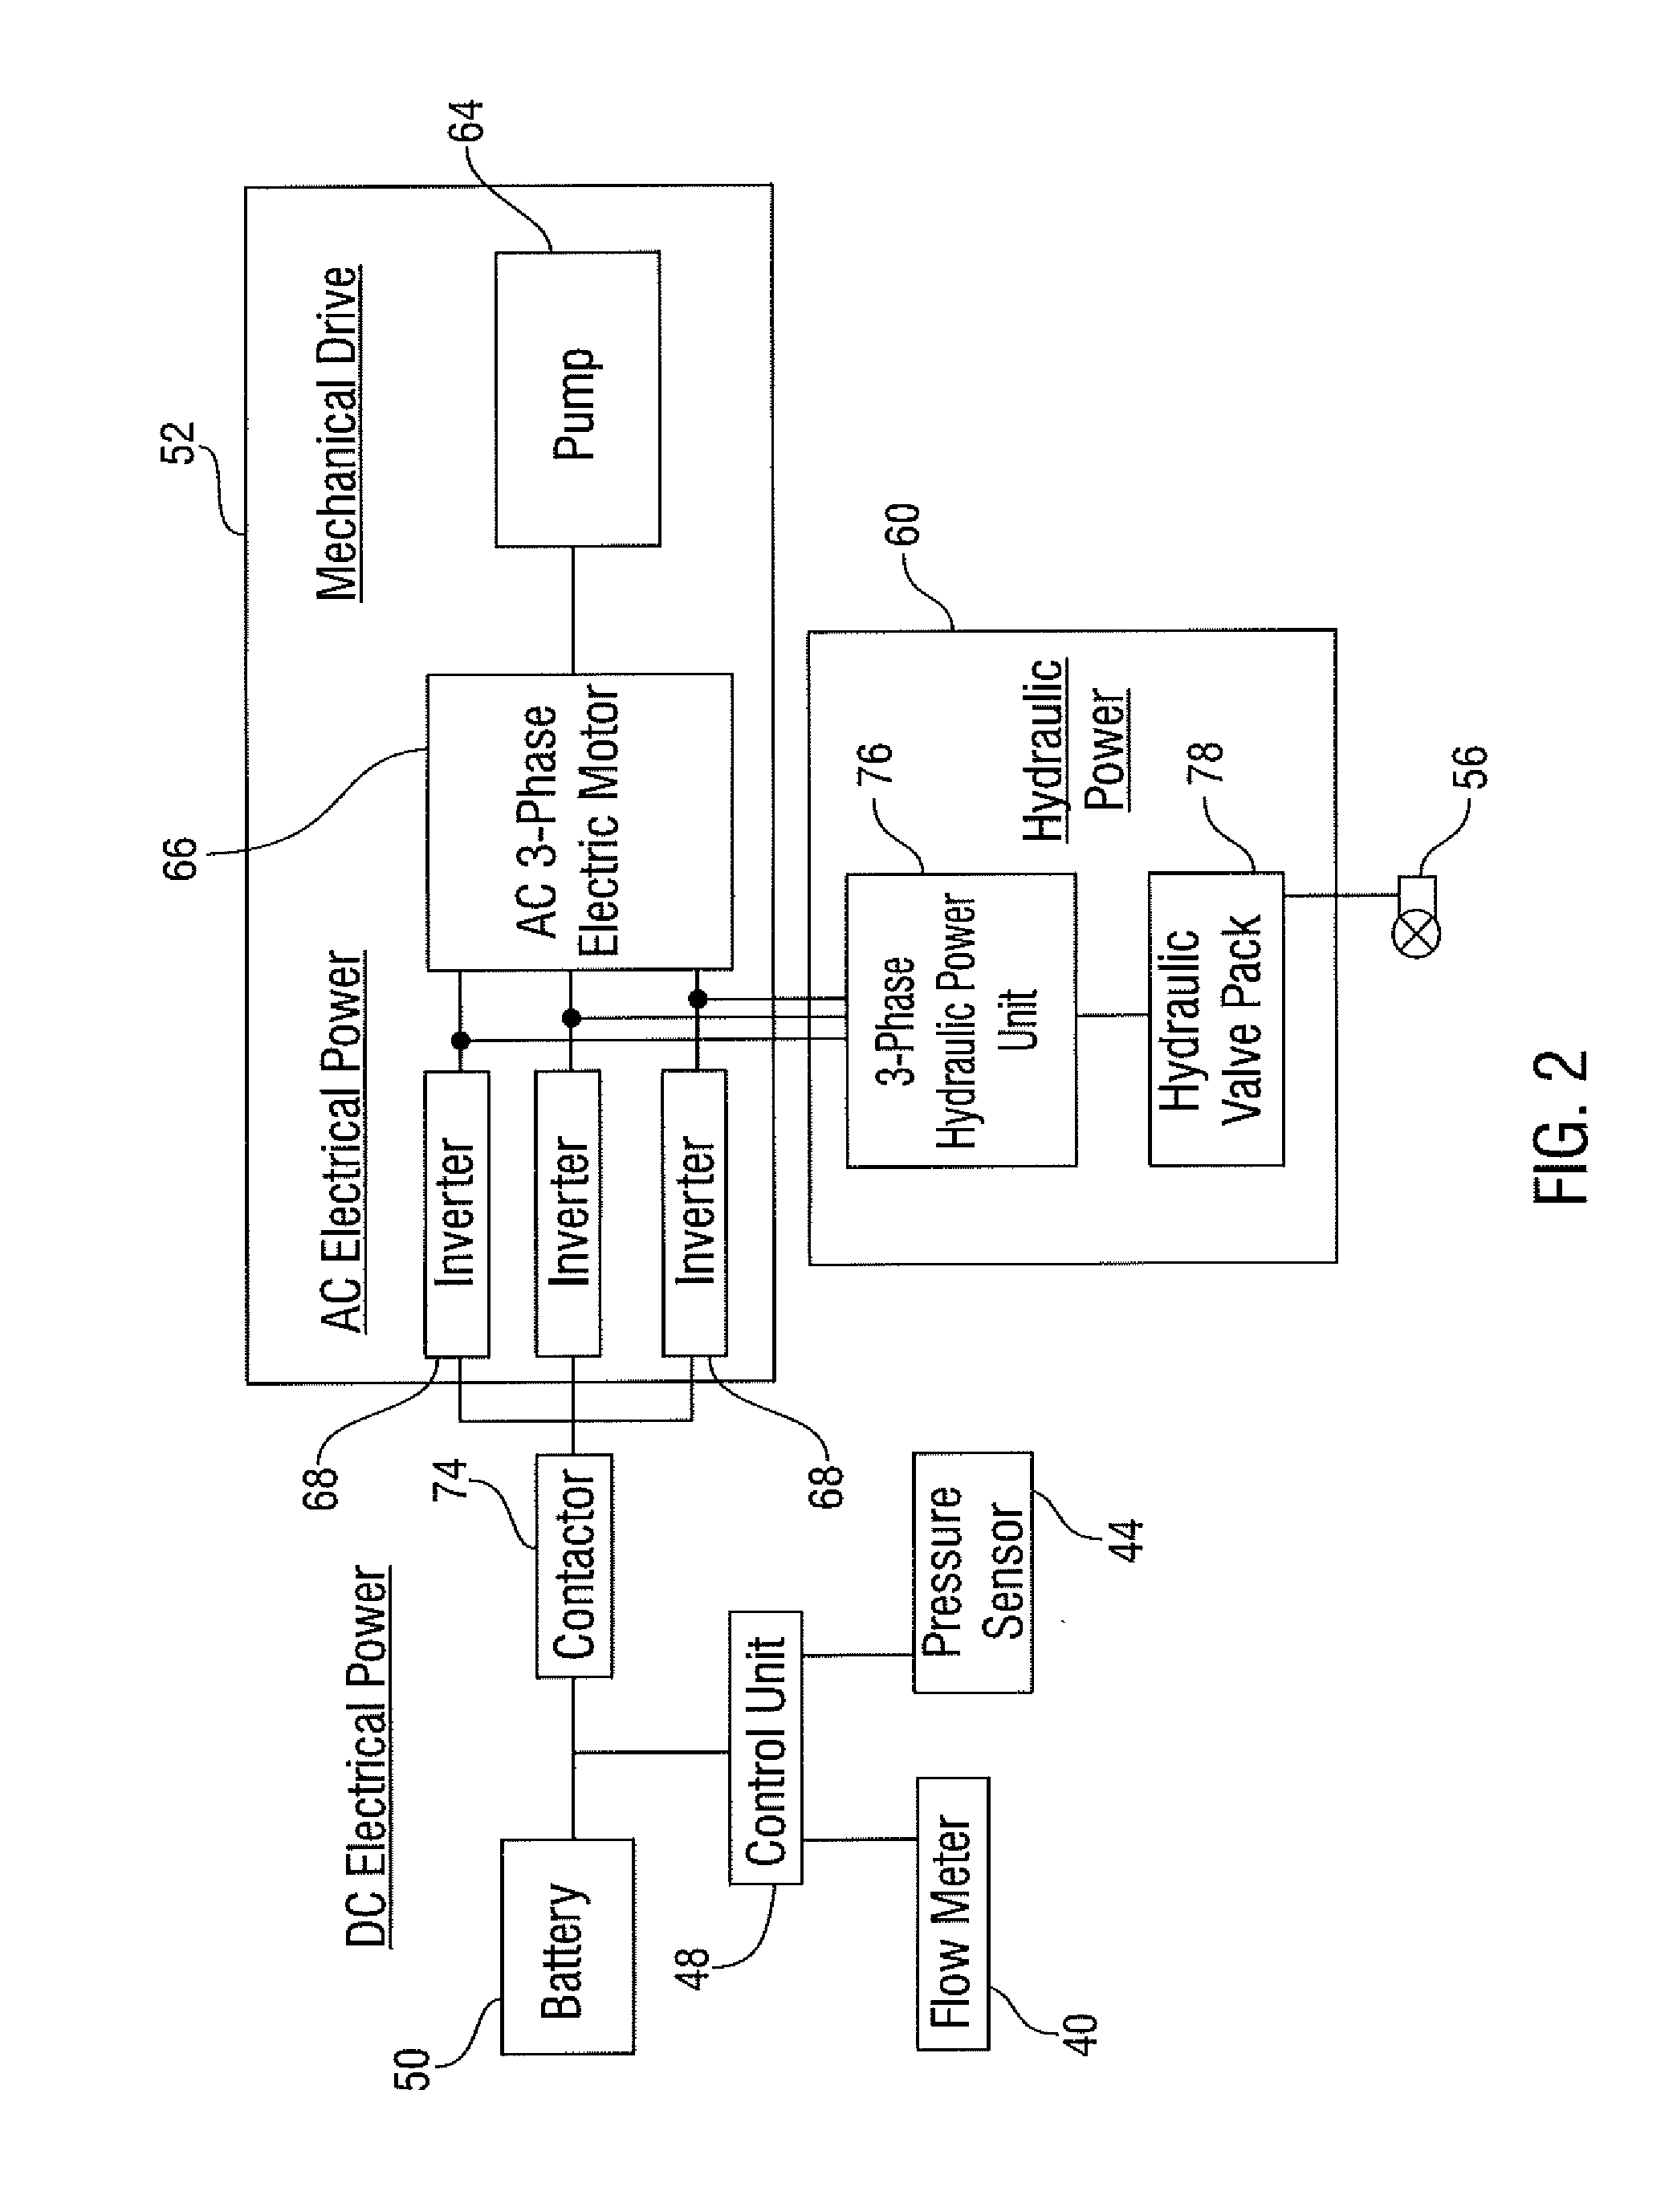 Apparatus and methods for providing fluid into a subsea pipeline